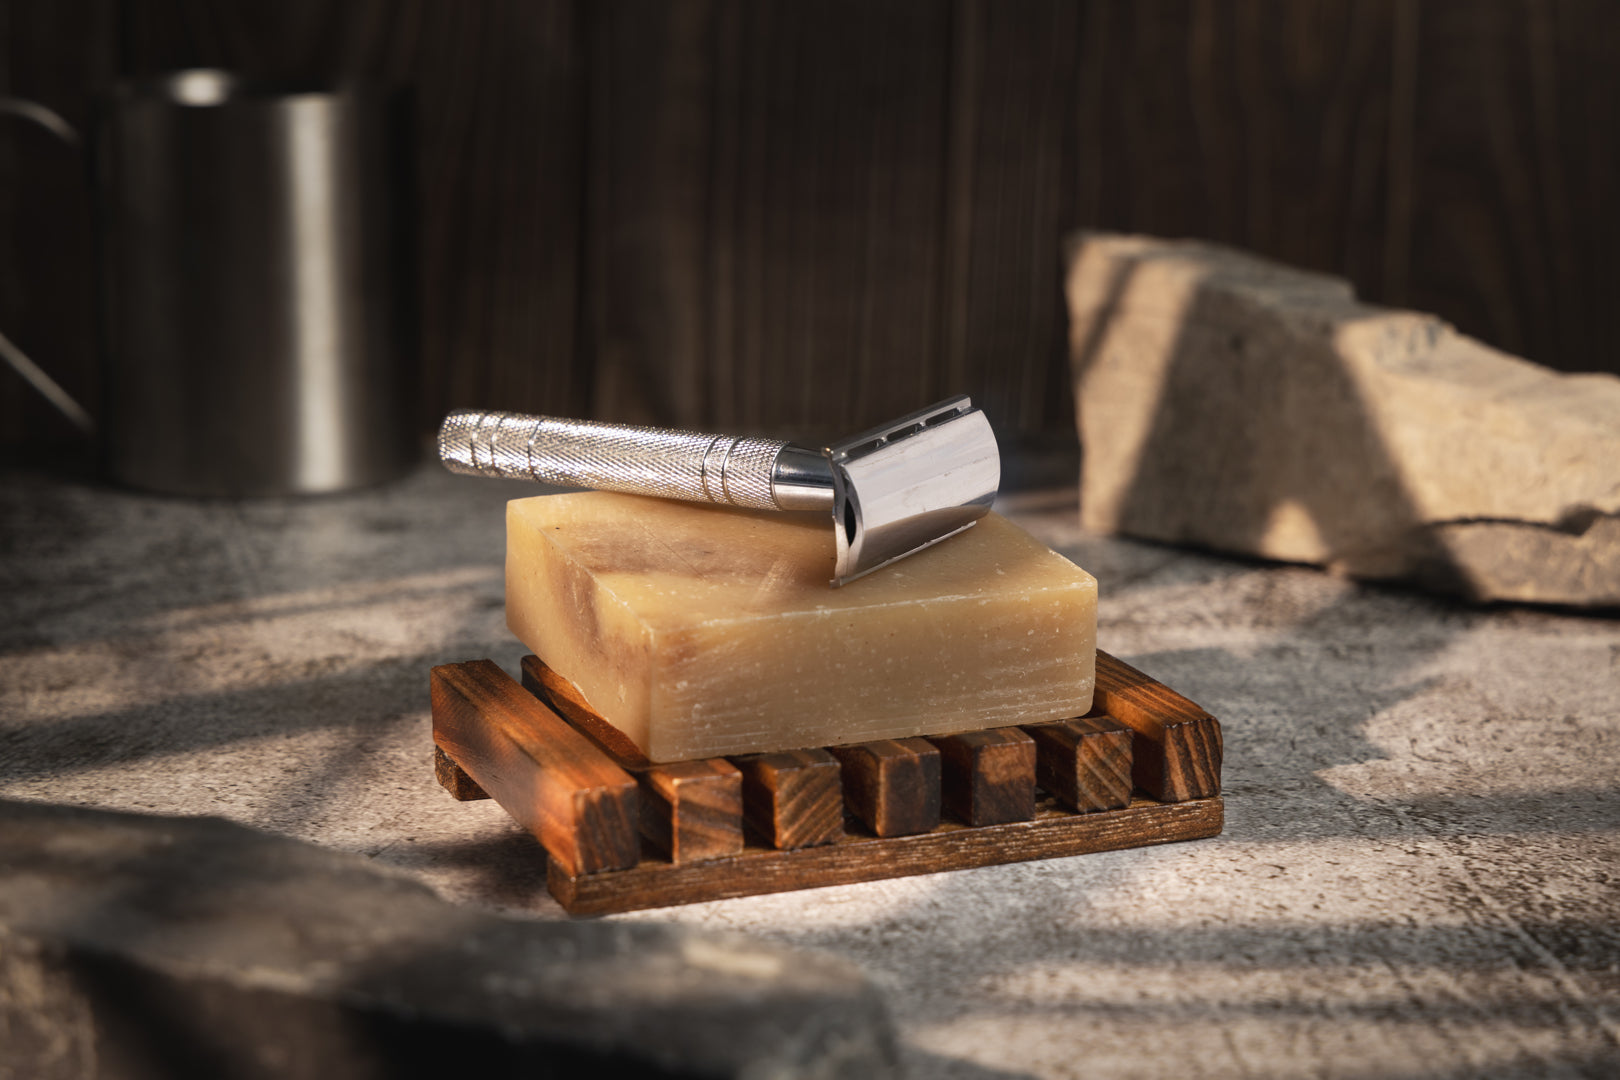 This image shows a dark stained wood soap dish to help keep soap dry. It is rectangular in shape. It is designed for a more eco friendly zero waste sustainable lifestyle and routine. On top of the soap dish is a solid soap bar and a metal reusable safety razor